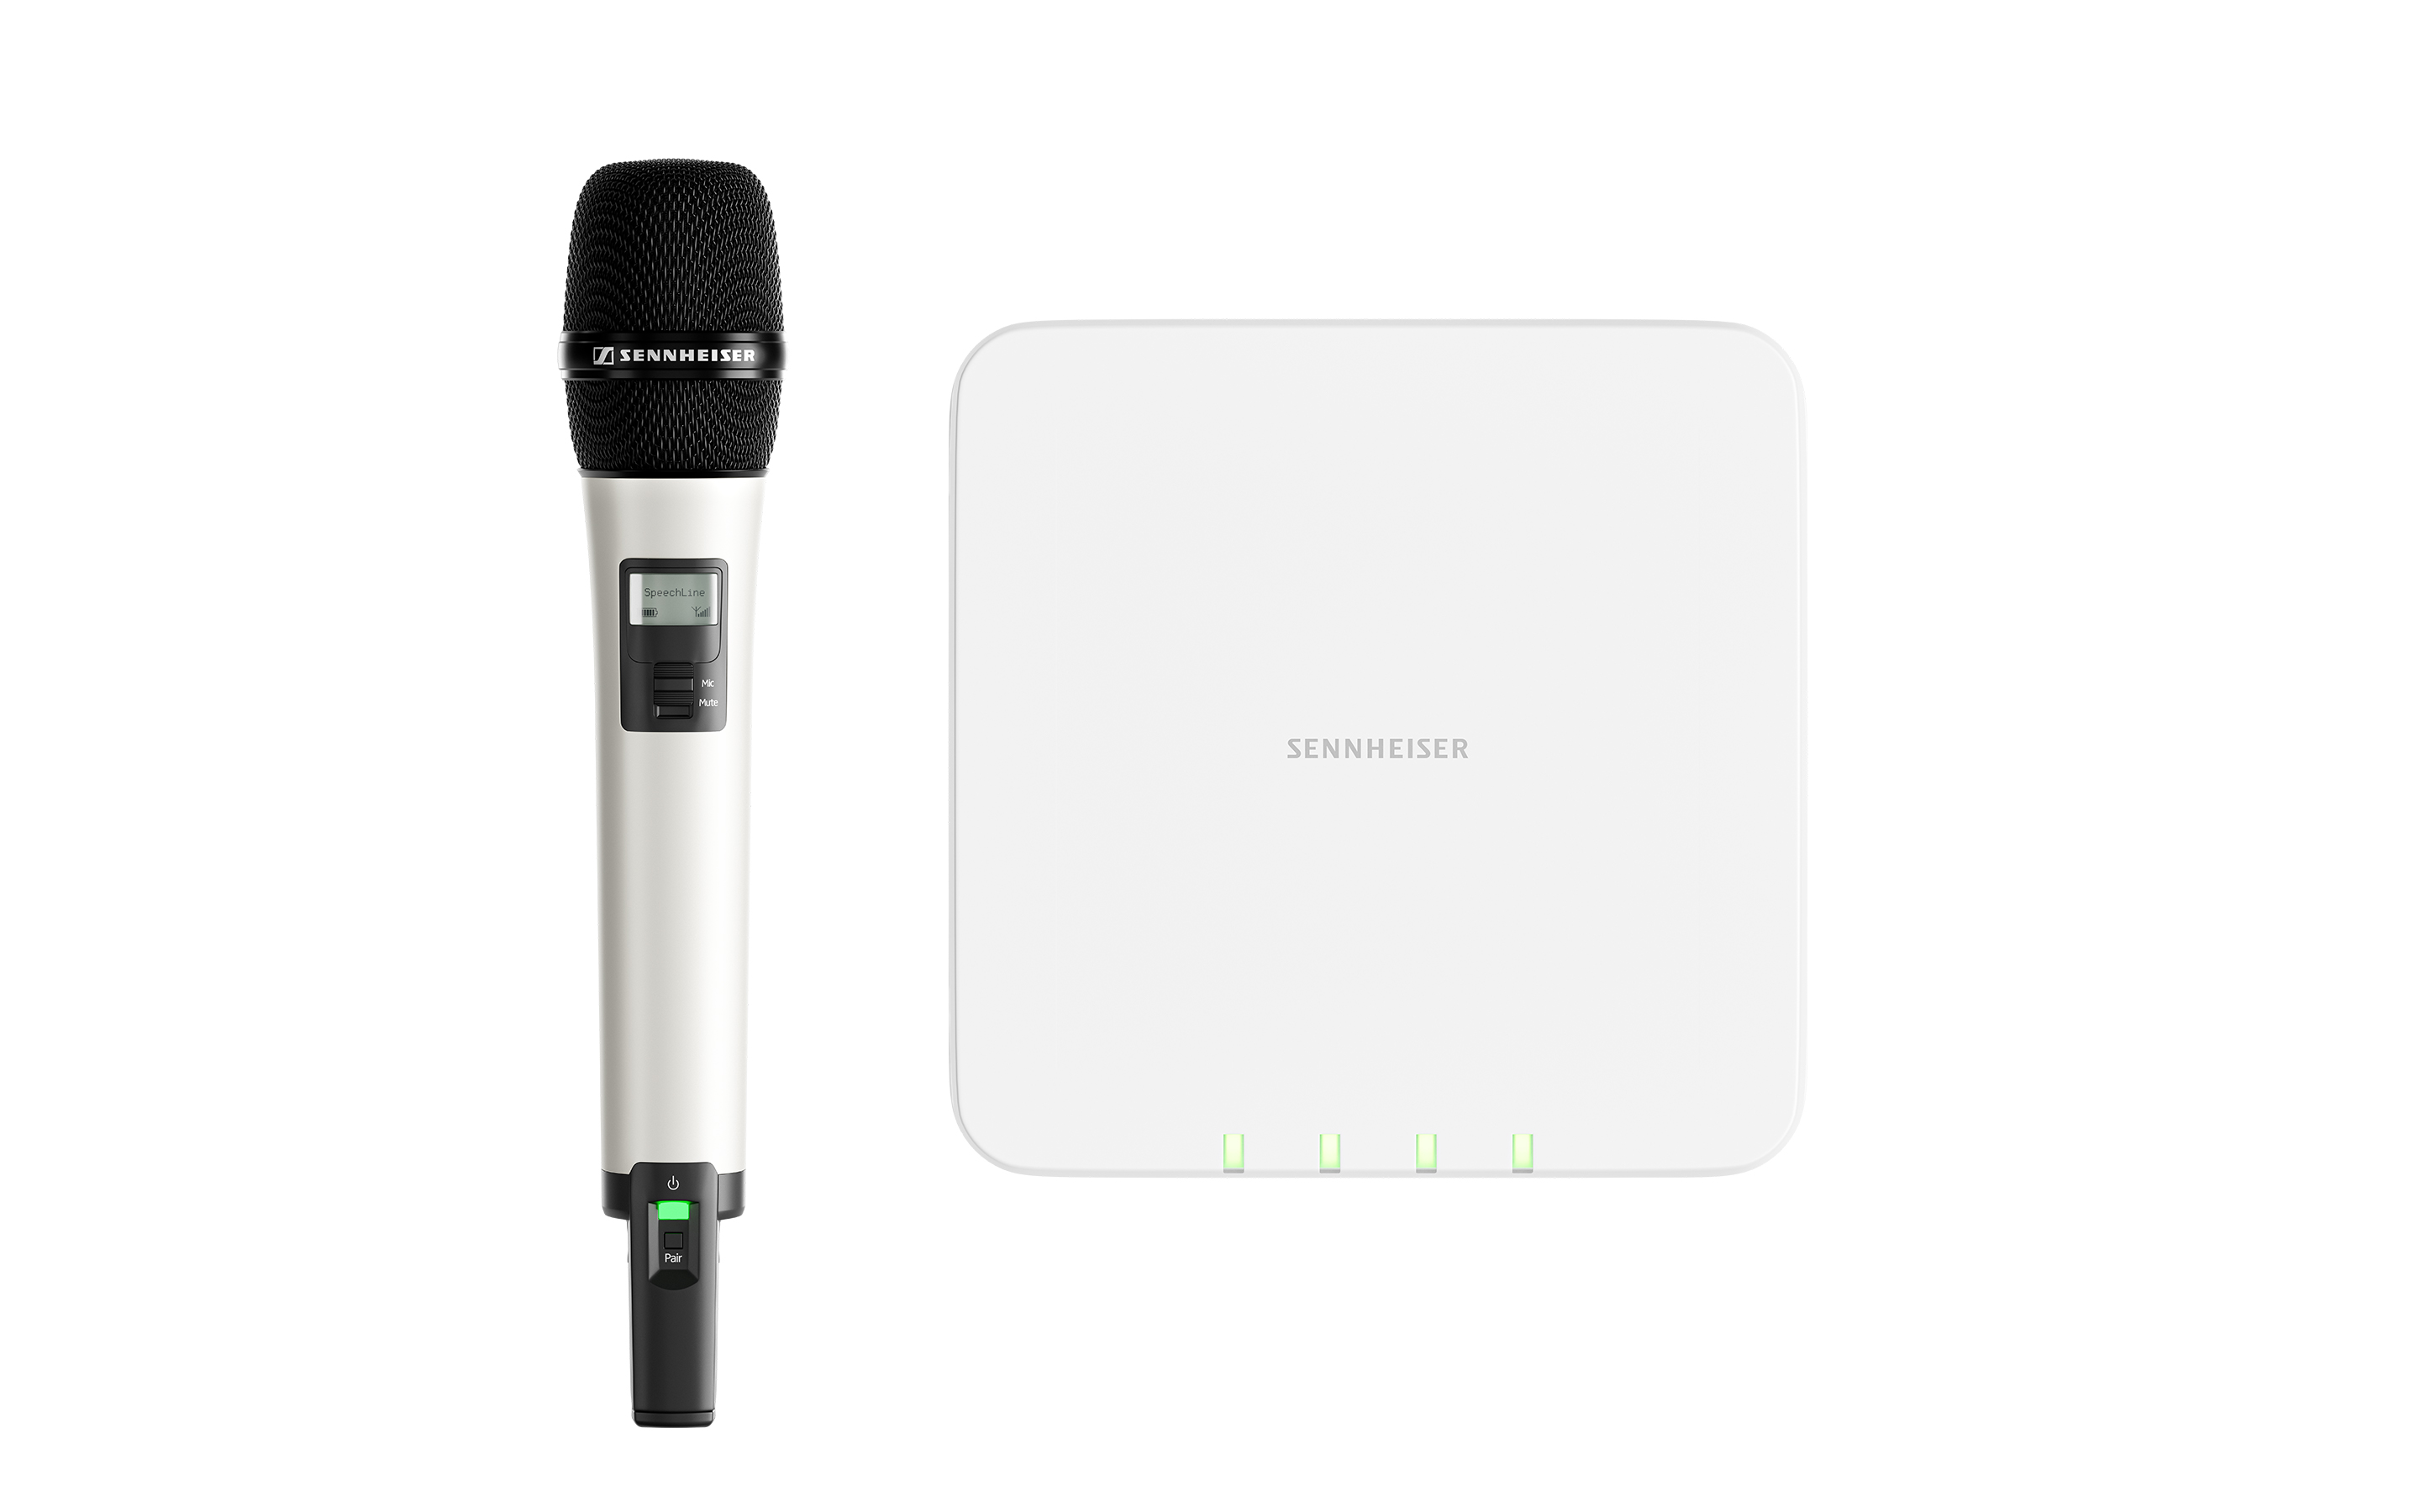 The multichannel microphone receiver of Sennheiser’s SpeechLine Digital Wireless series is a perfect match for modern IT infrastructures